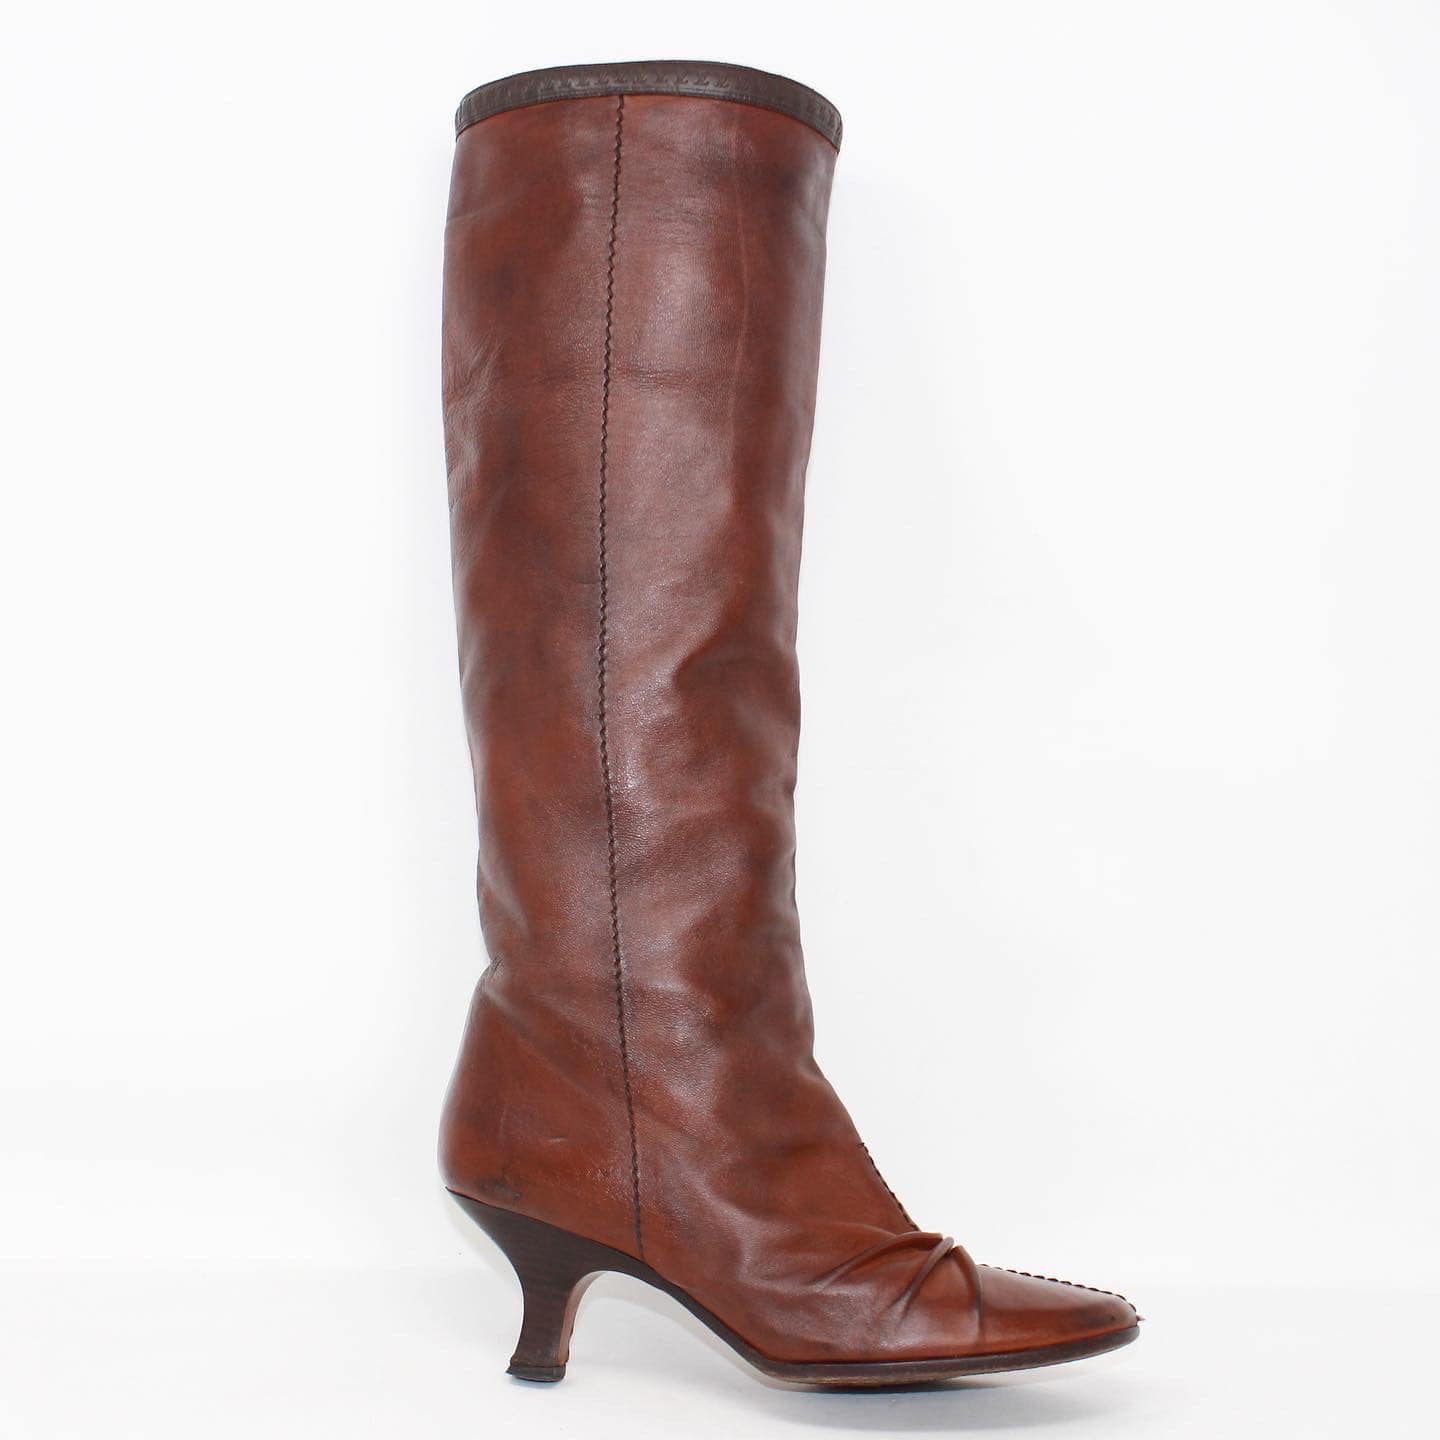 Louis Vuitton Brown Leather Knee High Riding Boots Size 39.5 Louis